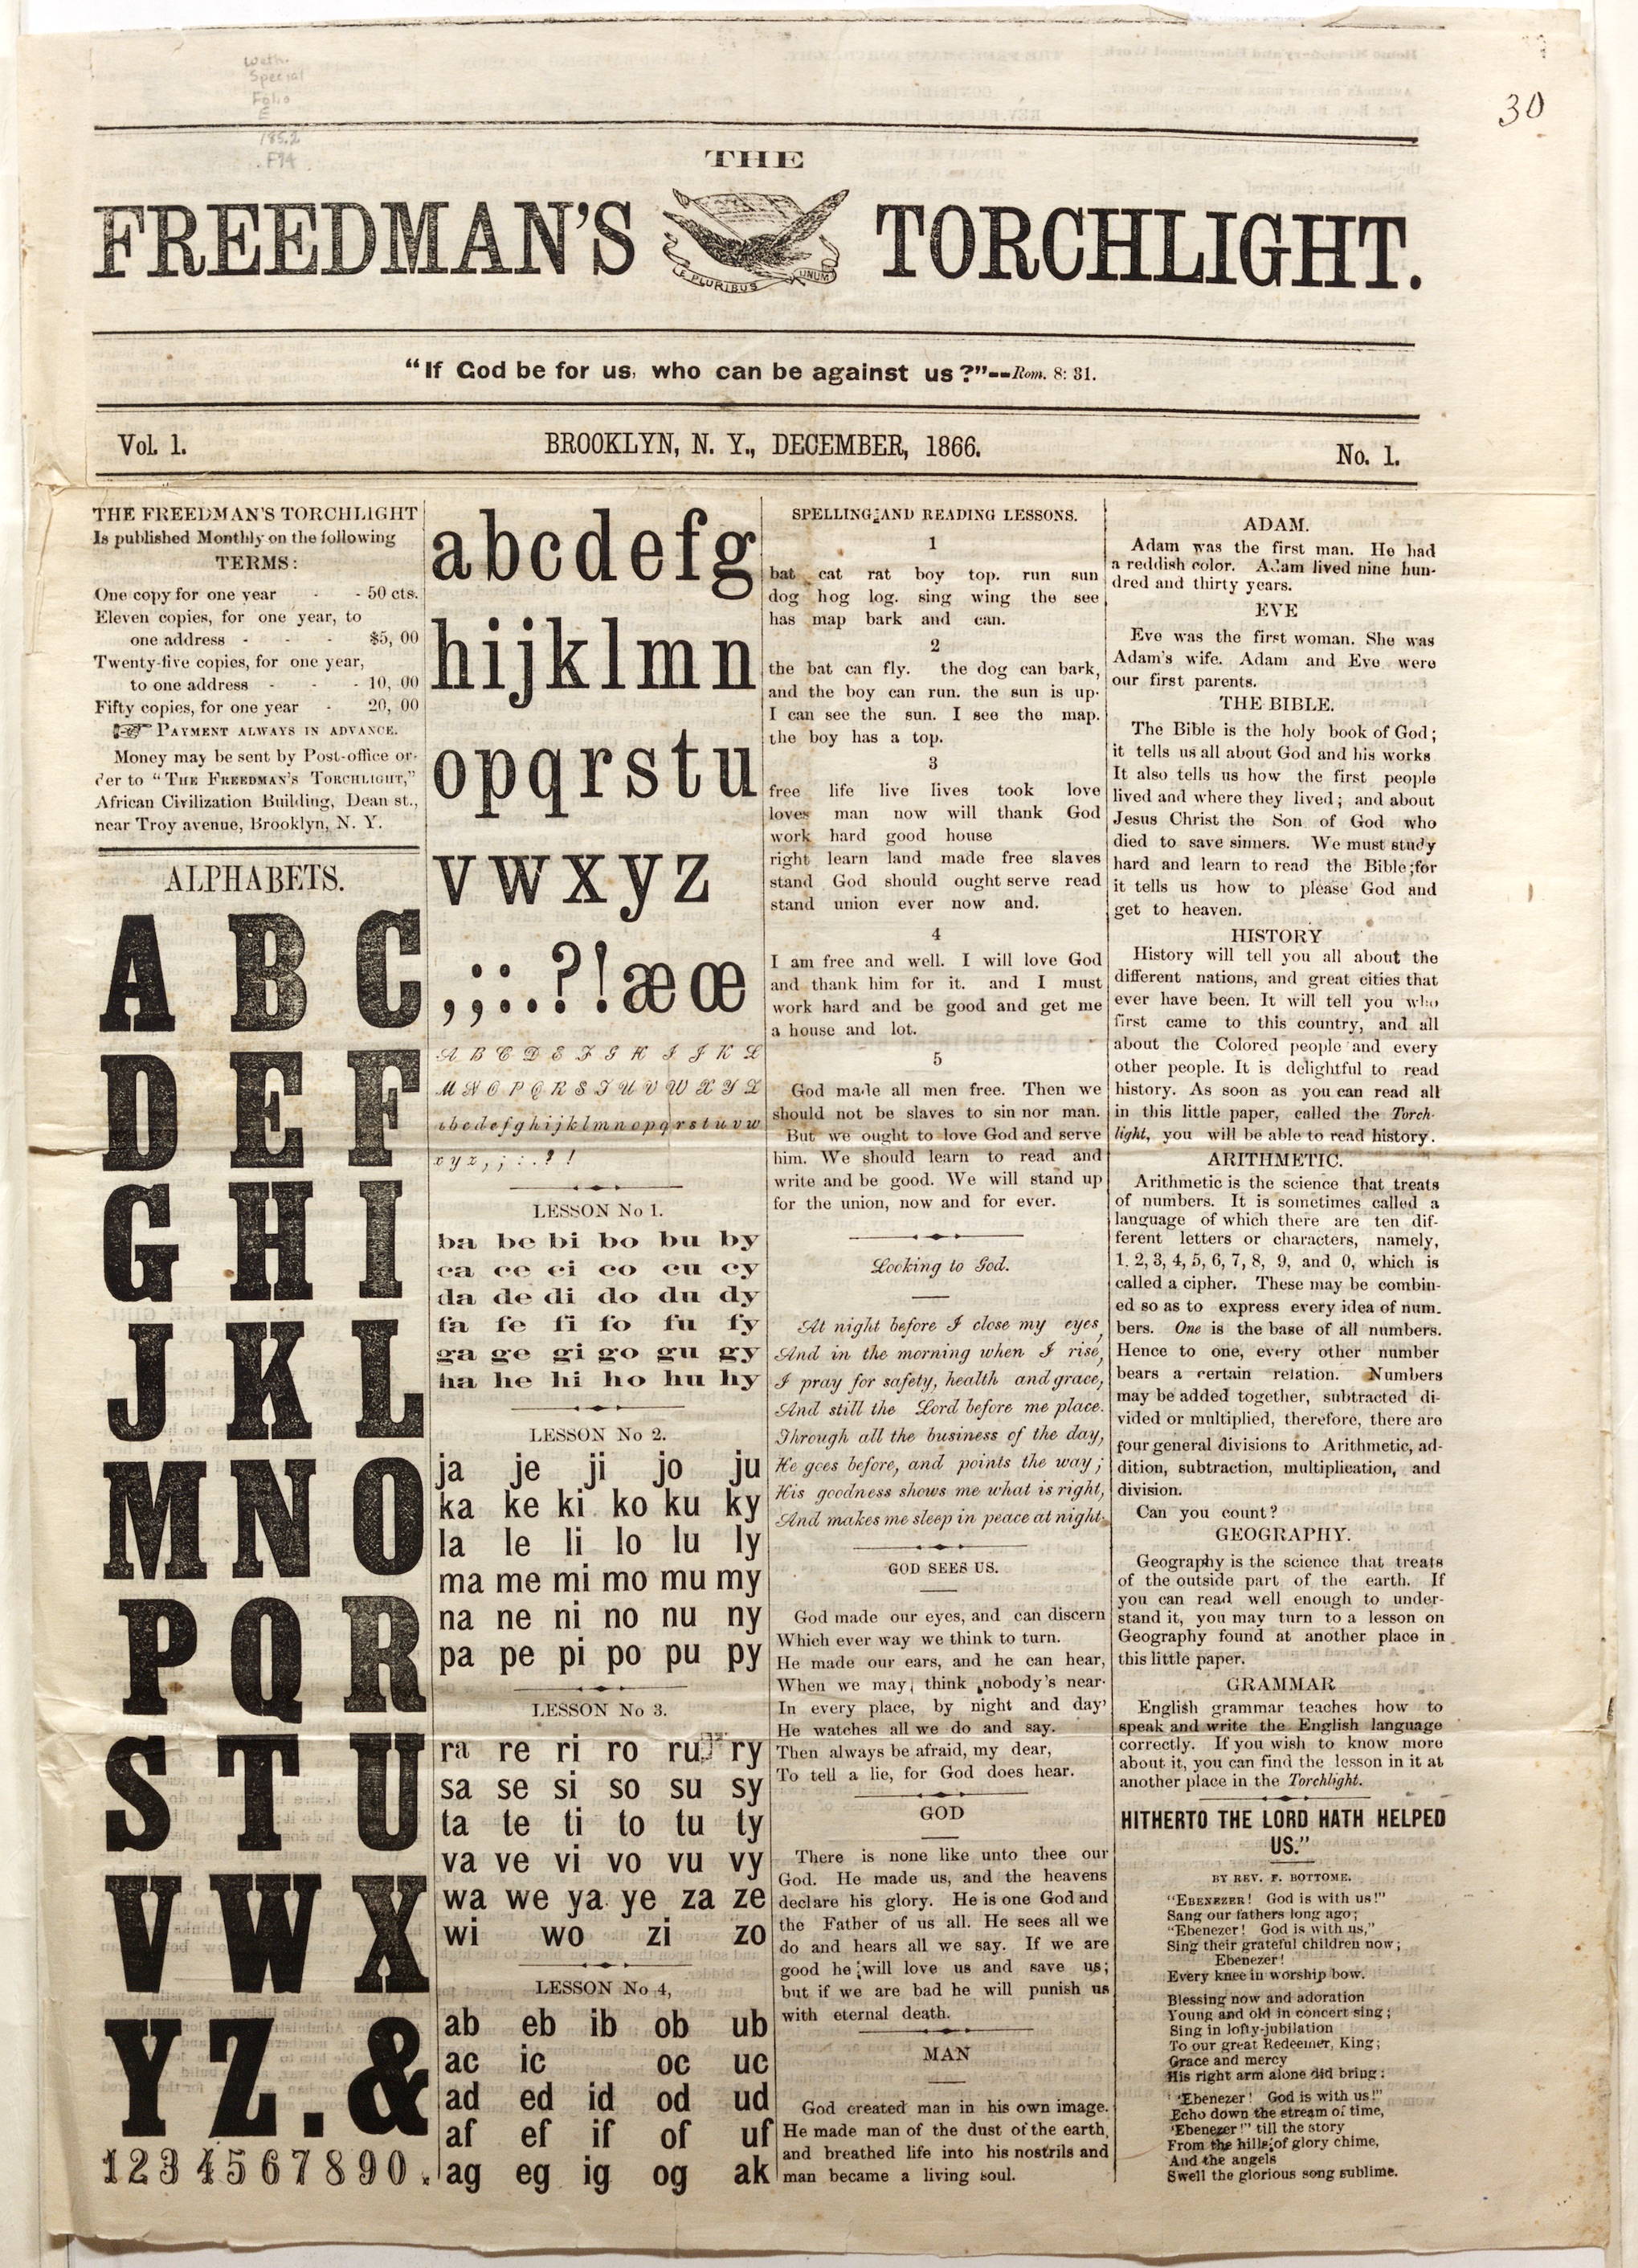 Front page of the Freedman's Torchlight, vol. 1, no. 1, December 1866.